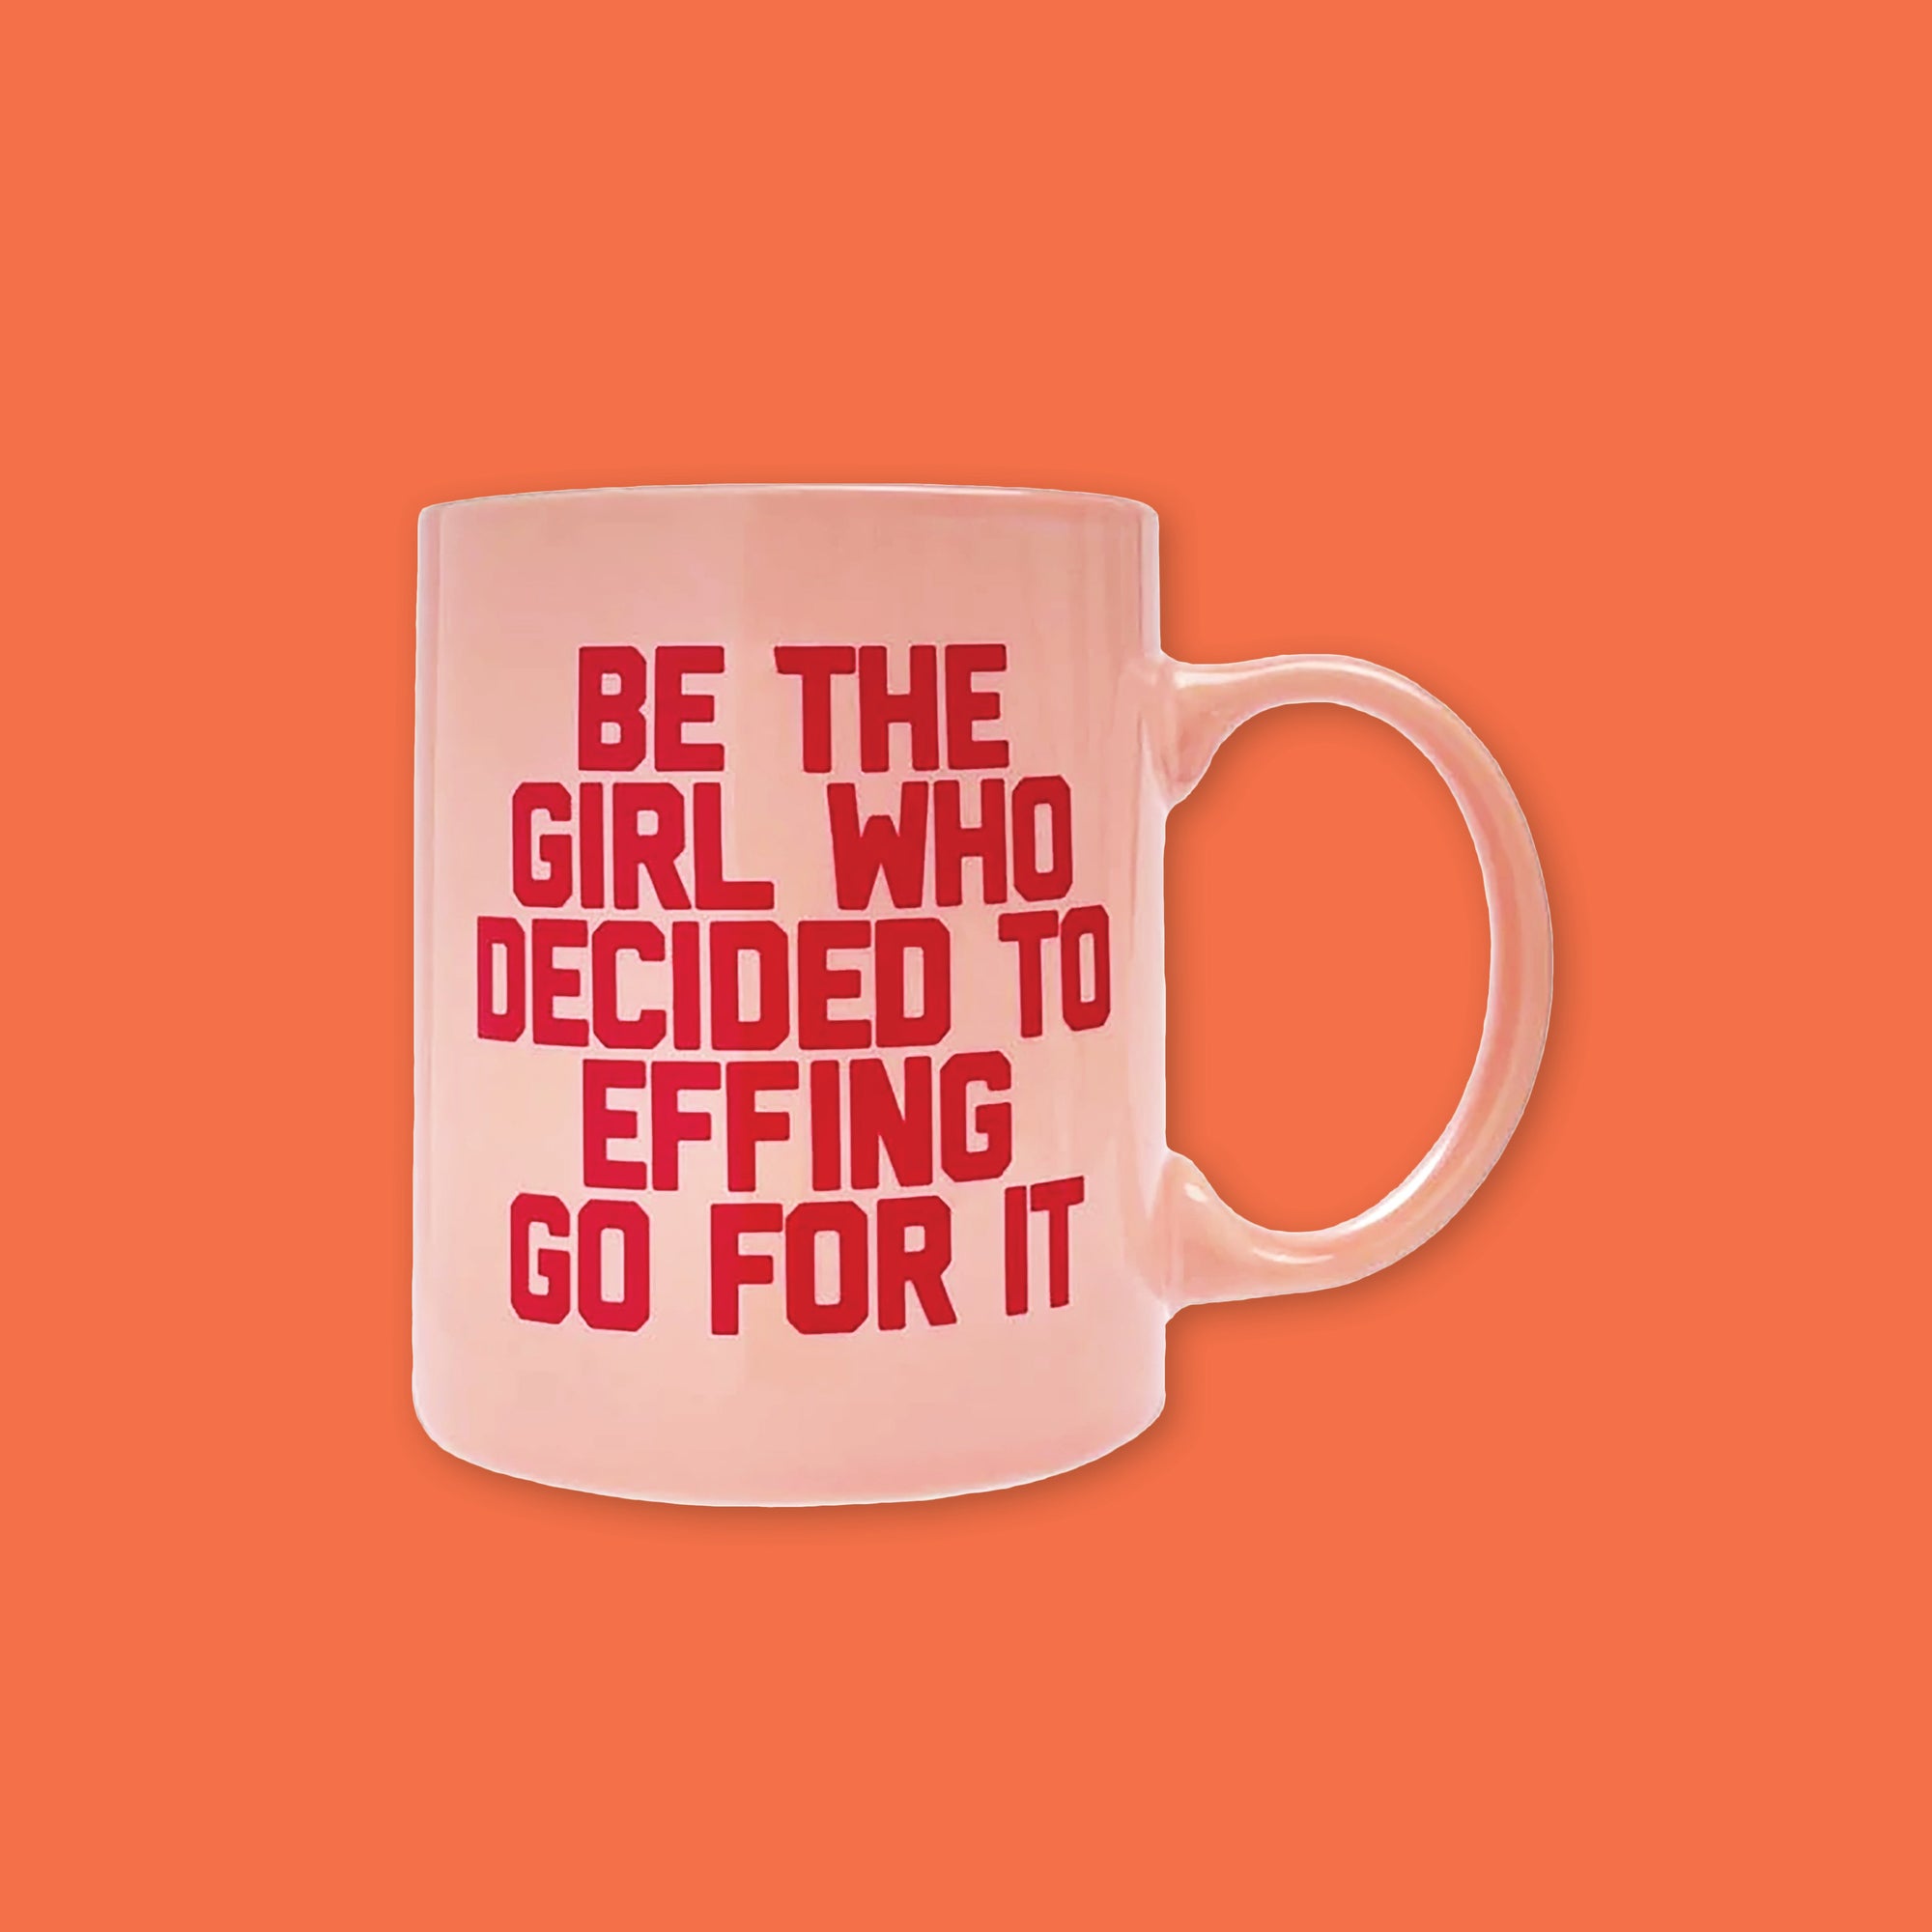 On an orangey-red background is a photo of a pink diner mug. On the mug is red all-caps collegiate writing that says "Be the girl who decided to effing go for it." 